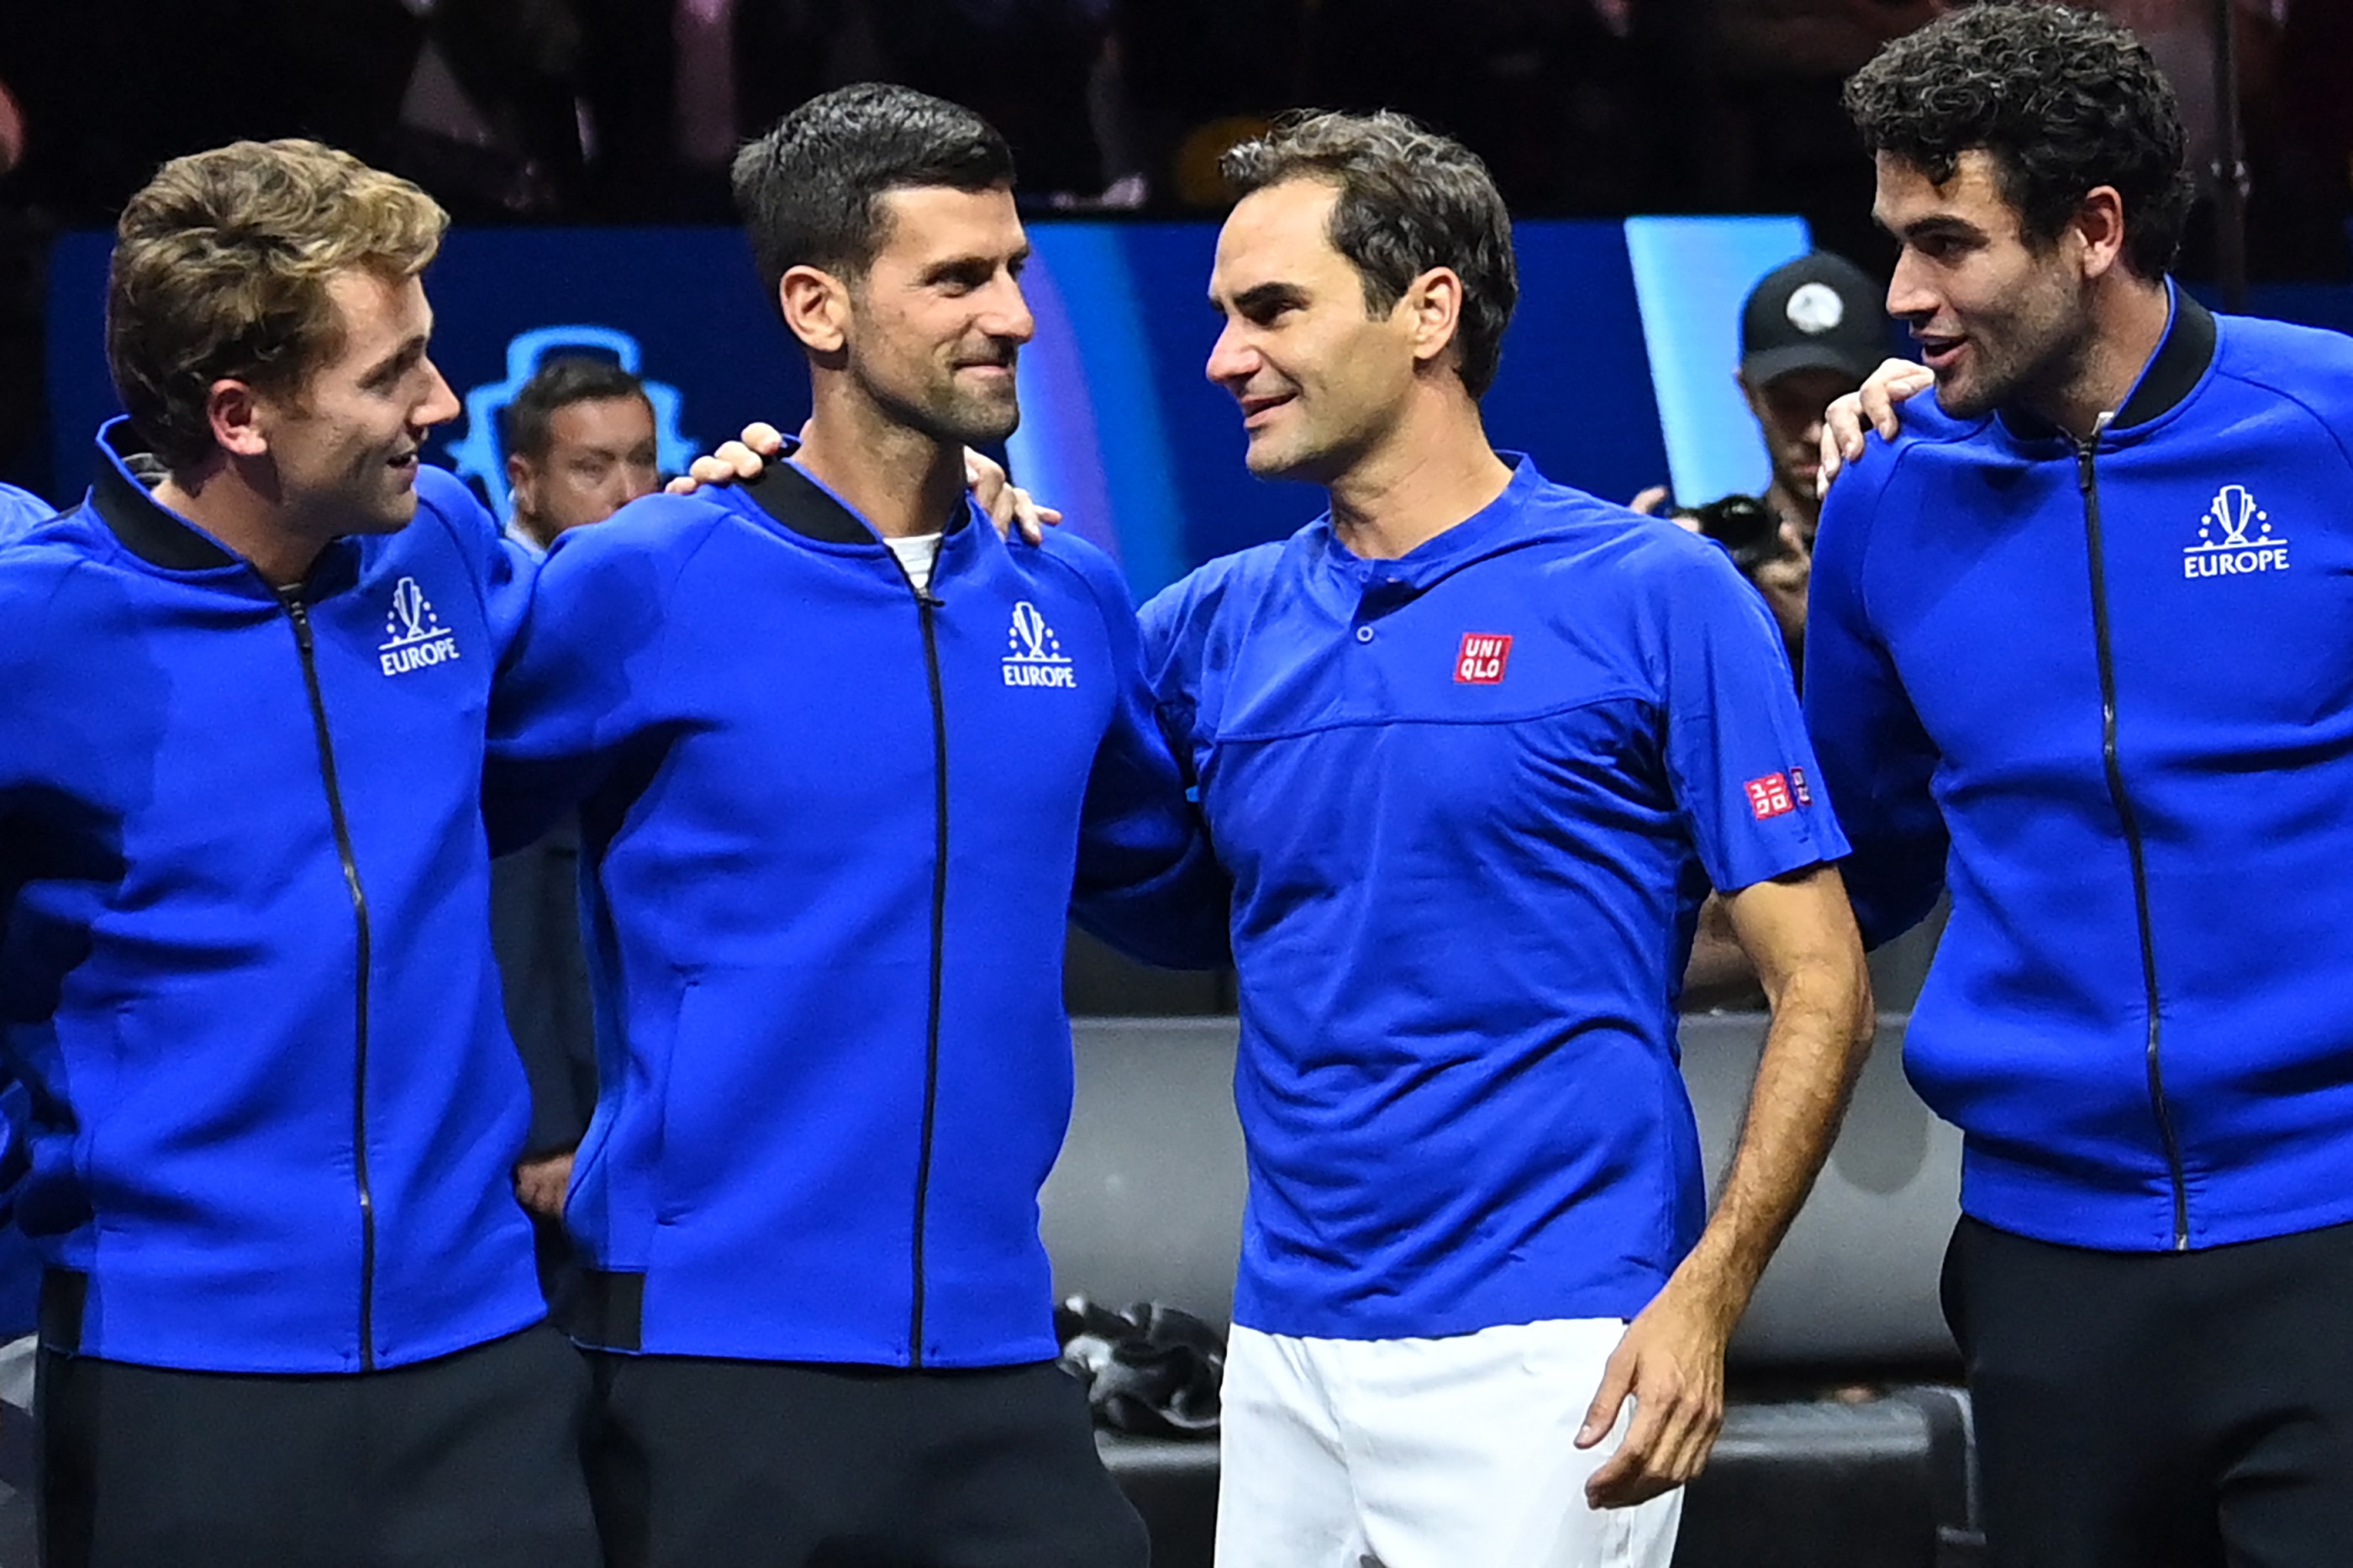 Laver Cup 2022 Daily updates and results